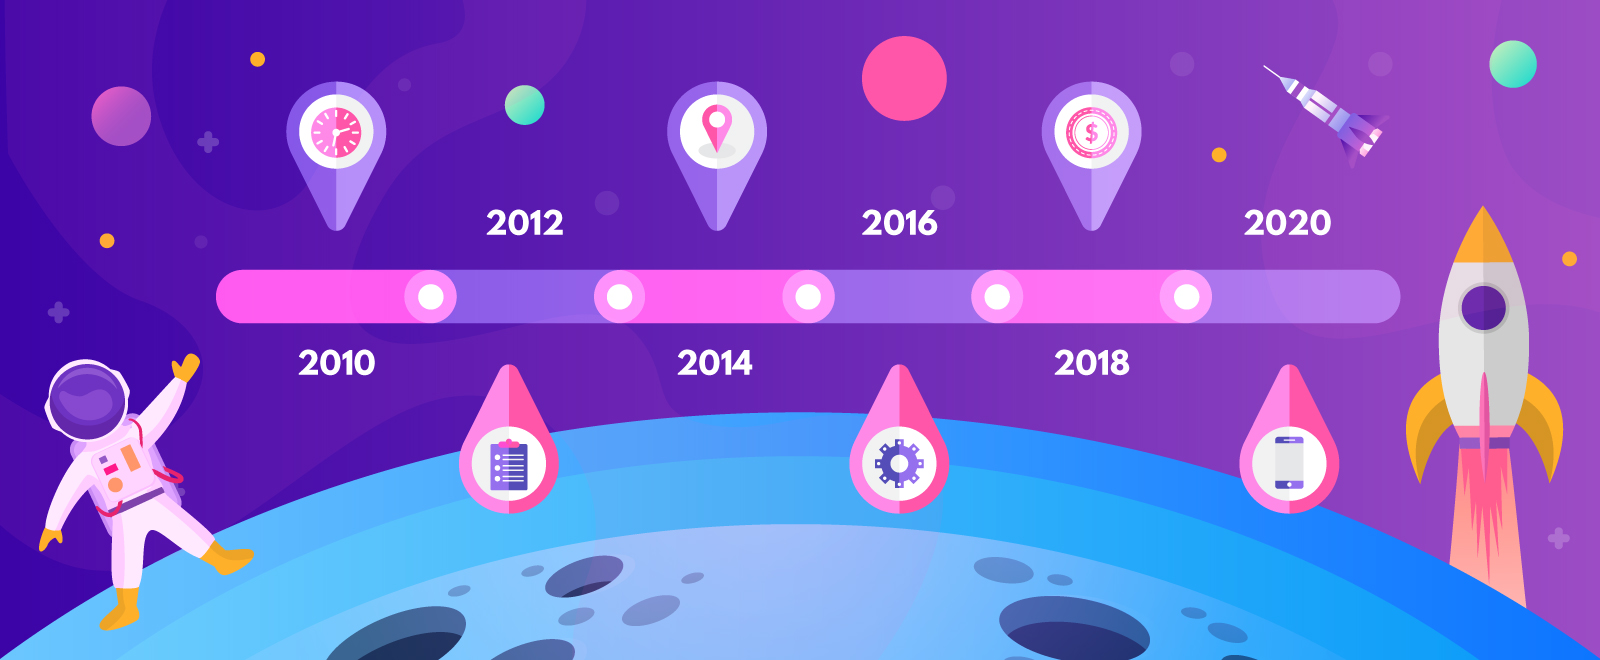  Infographic timeline templates and examples